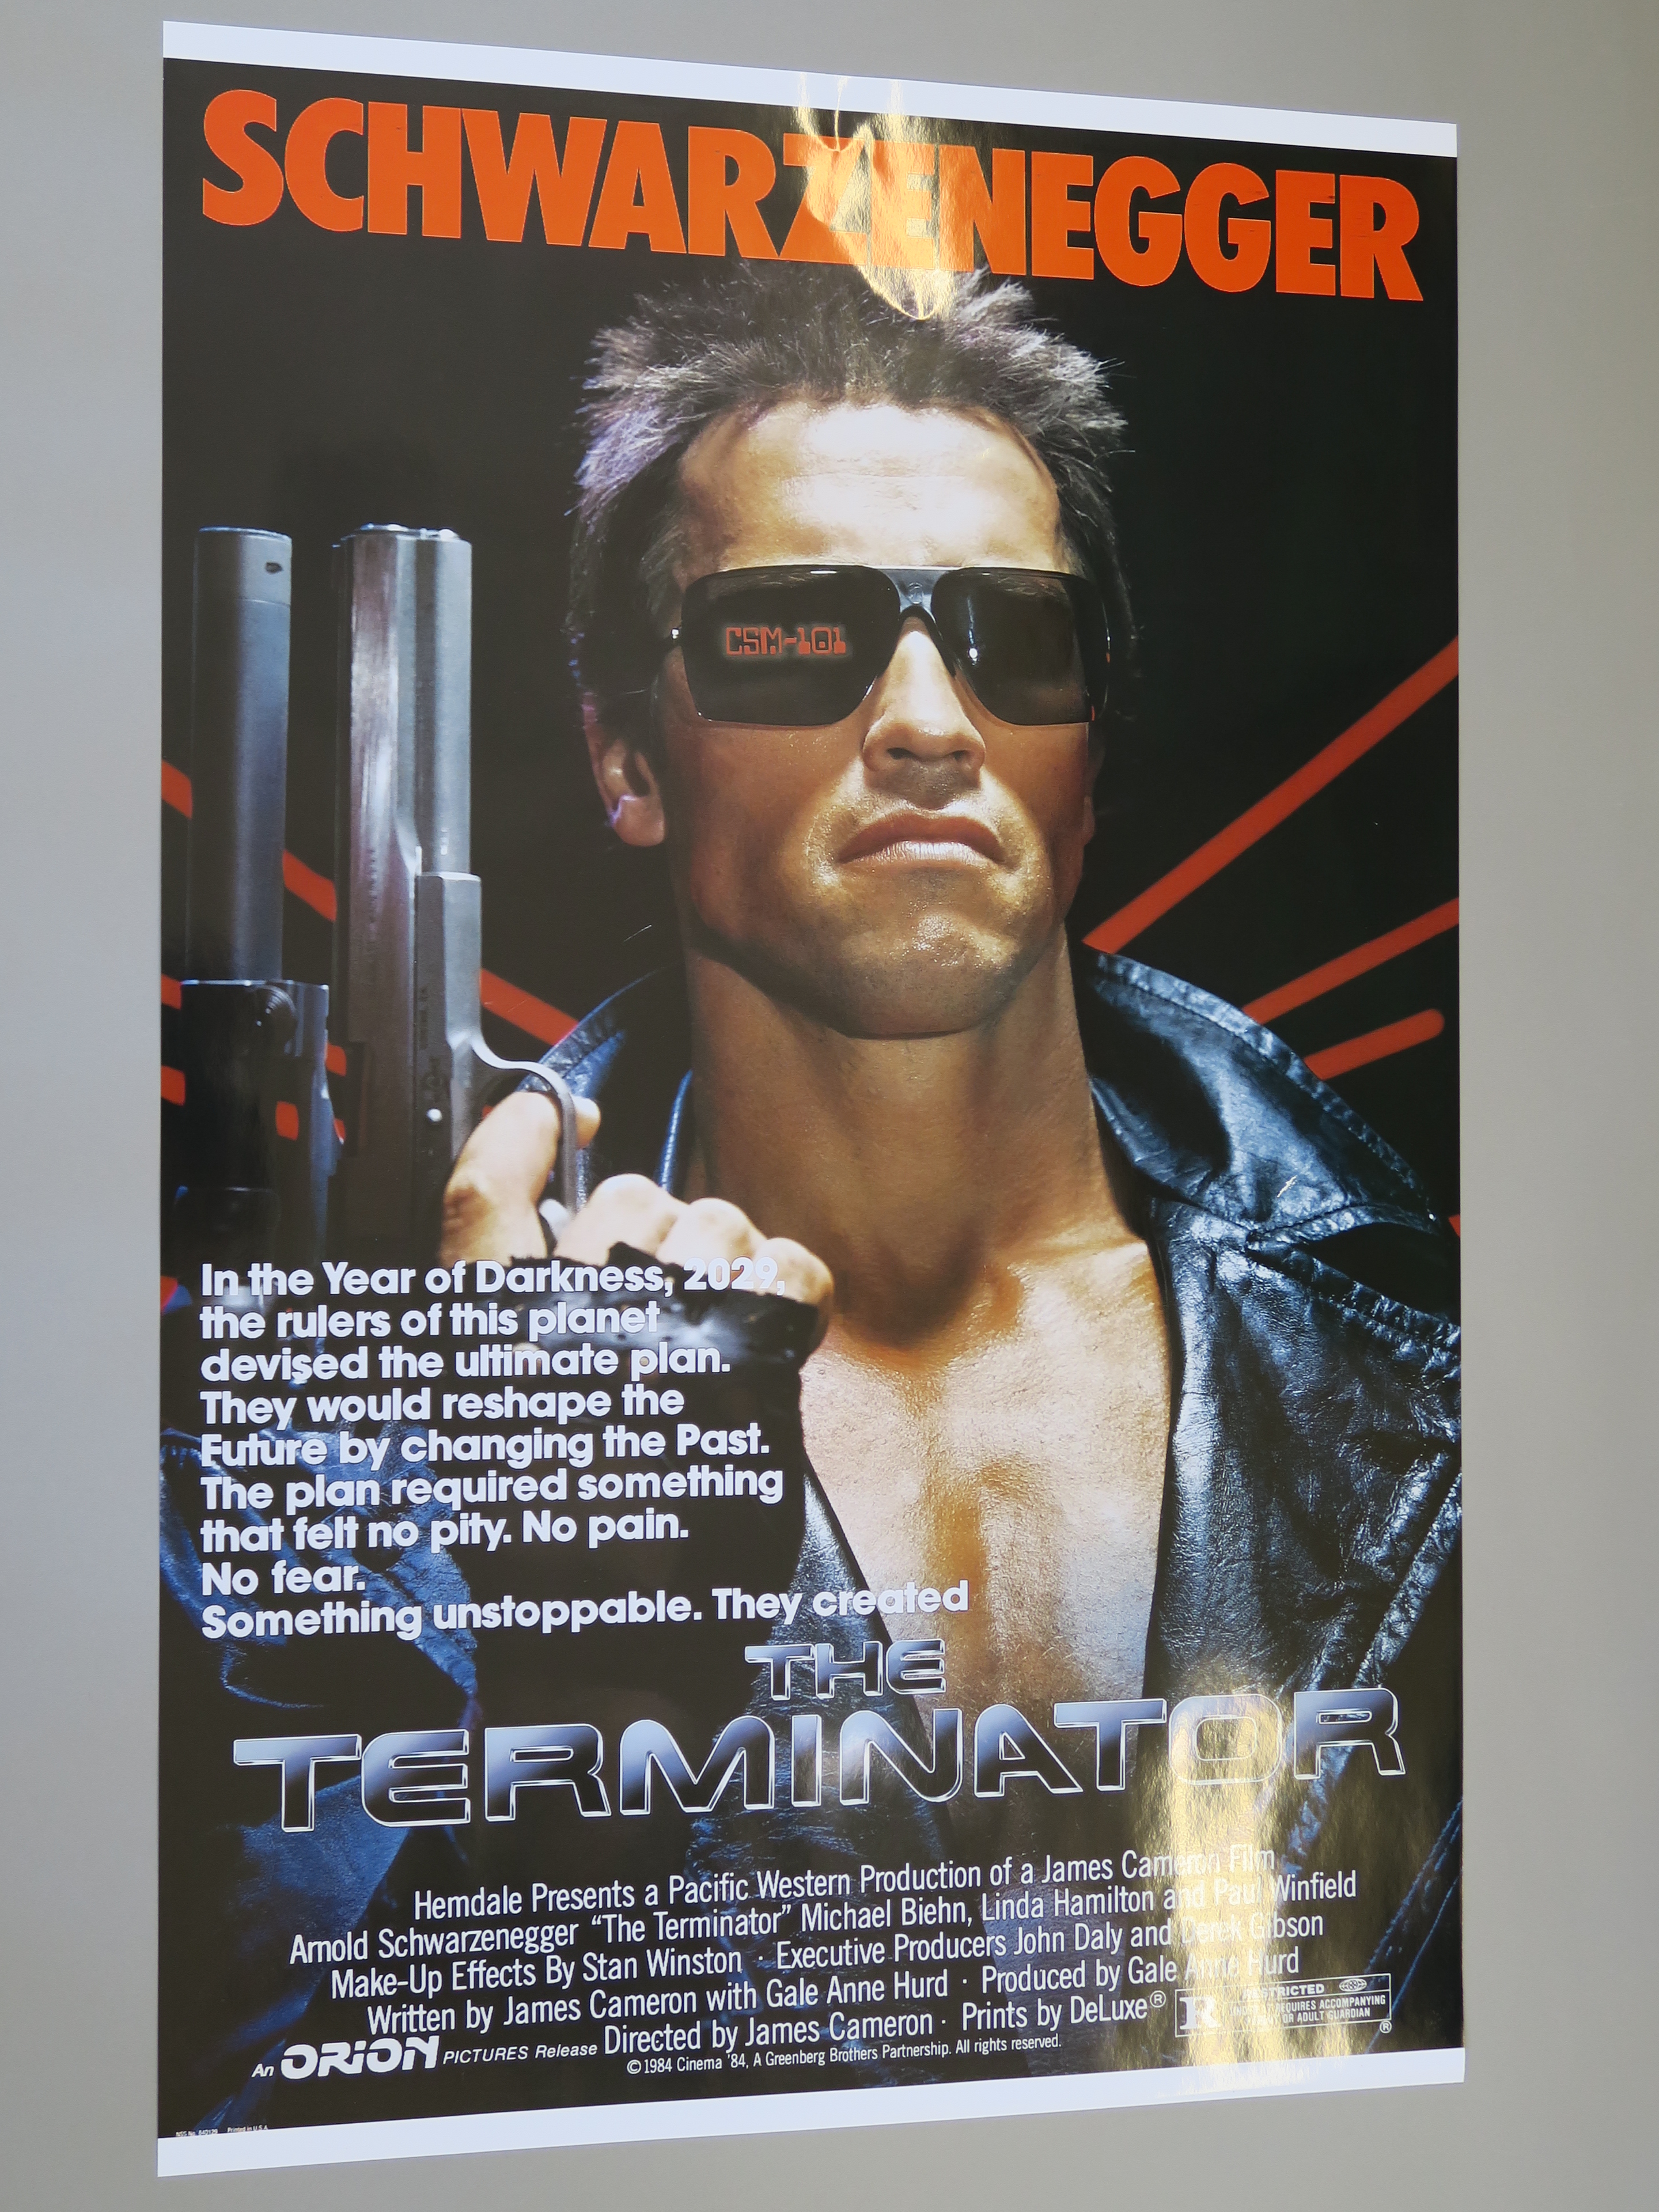 1 Selwyn browser inc repro posters for The Great Escape, Terminator, Marilyn Monroe, Ben Hur, - Image 2 of 6